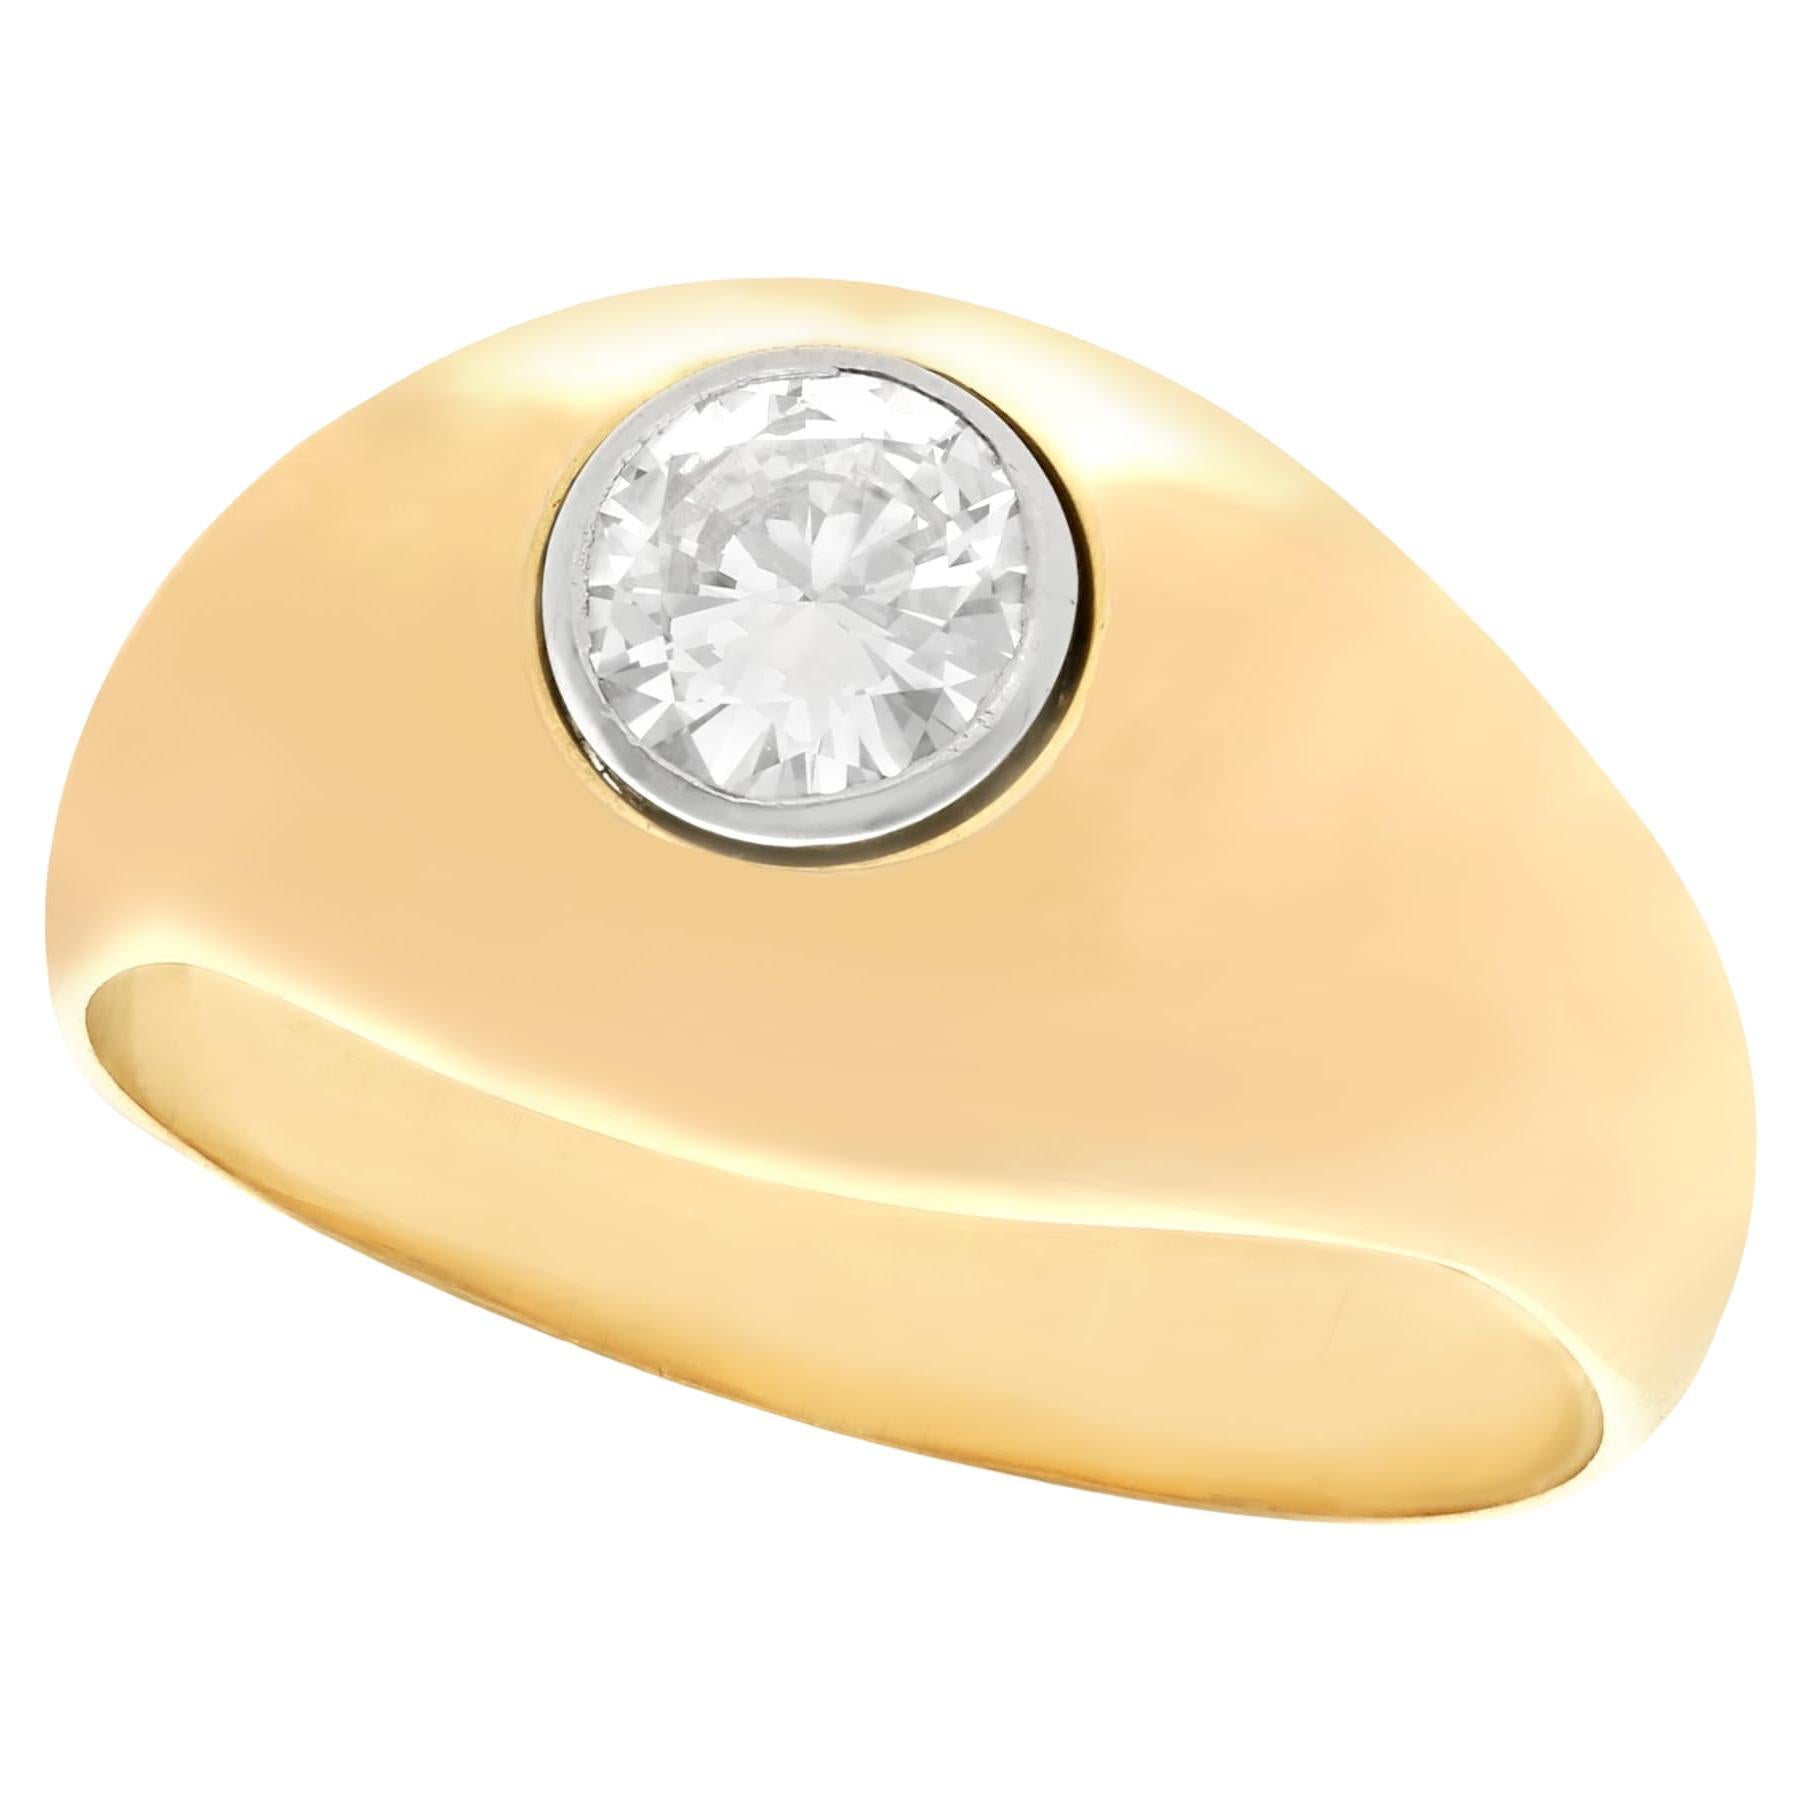 Unisex Diamond and Yellow Gold Cocktail Ring Circa 1940